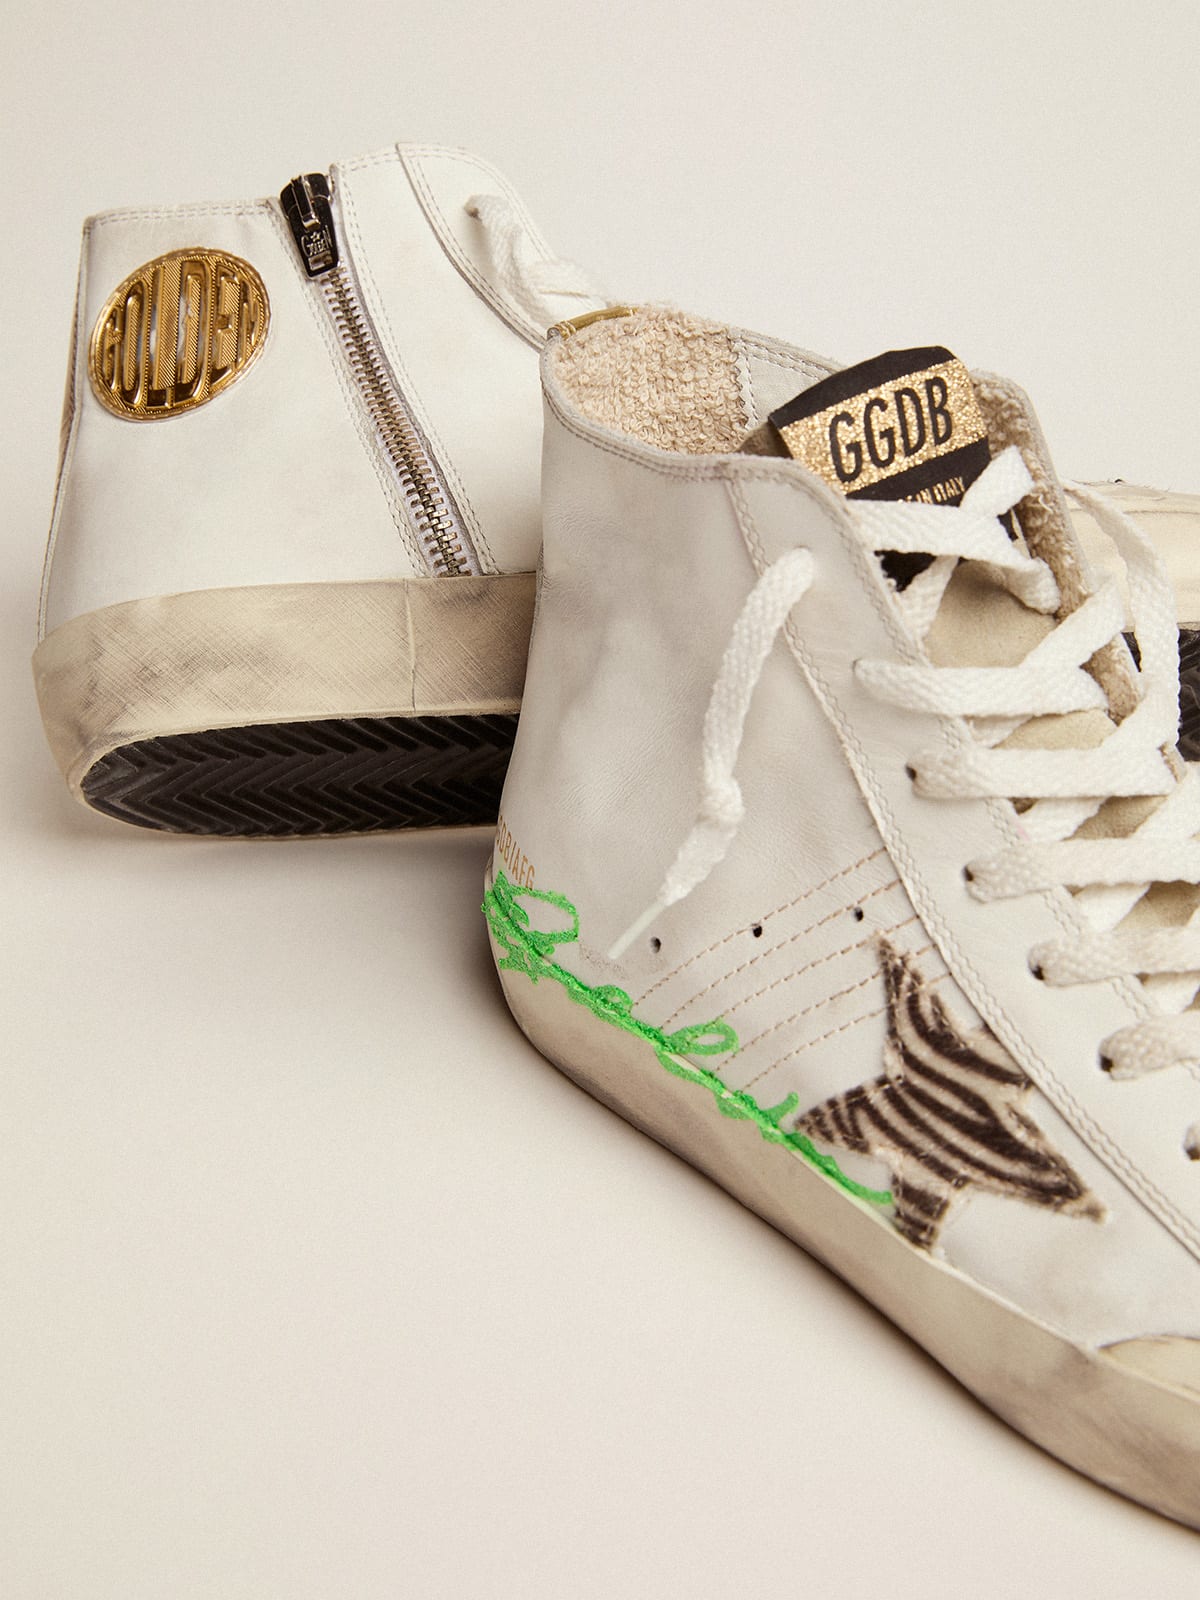 Golden Goose - Francy Penstar LTD sneakers with zebra-print pony skin star and toe and gold leather heel tab in 